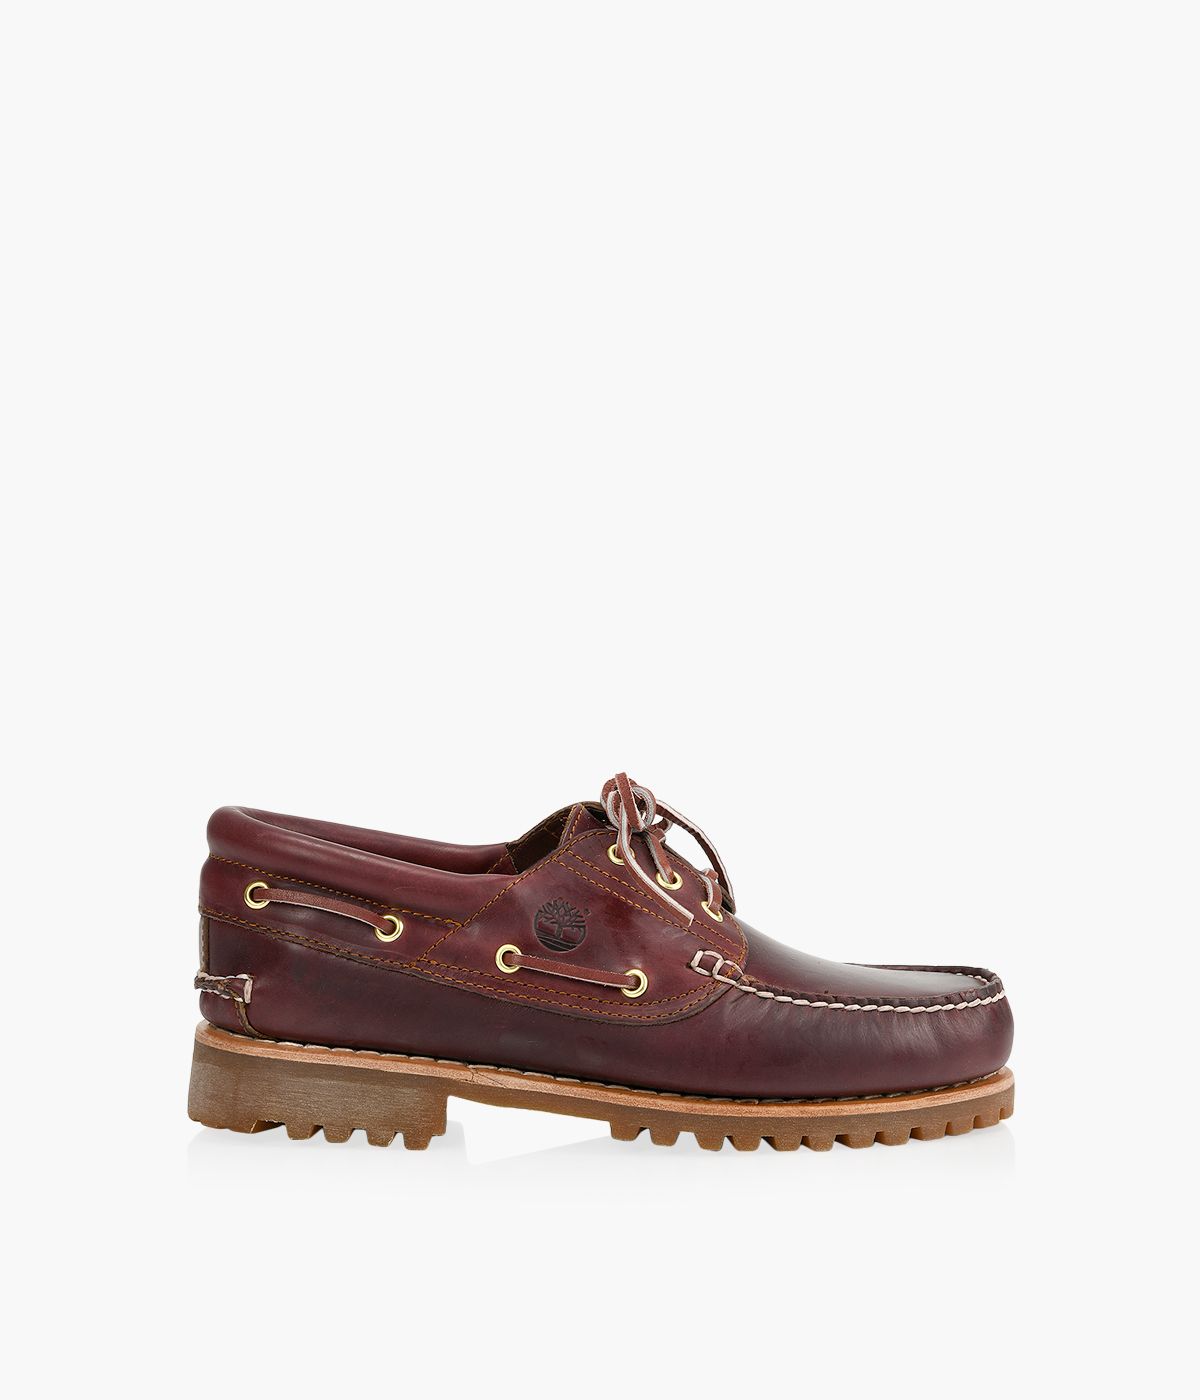 TIMBERLAND 3-EYE LUG HANDSEWN BOAT SHOE - Leather | Browns Shoes